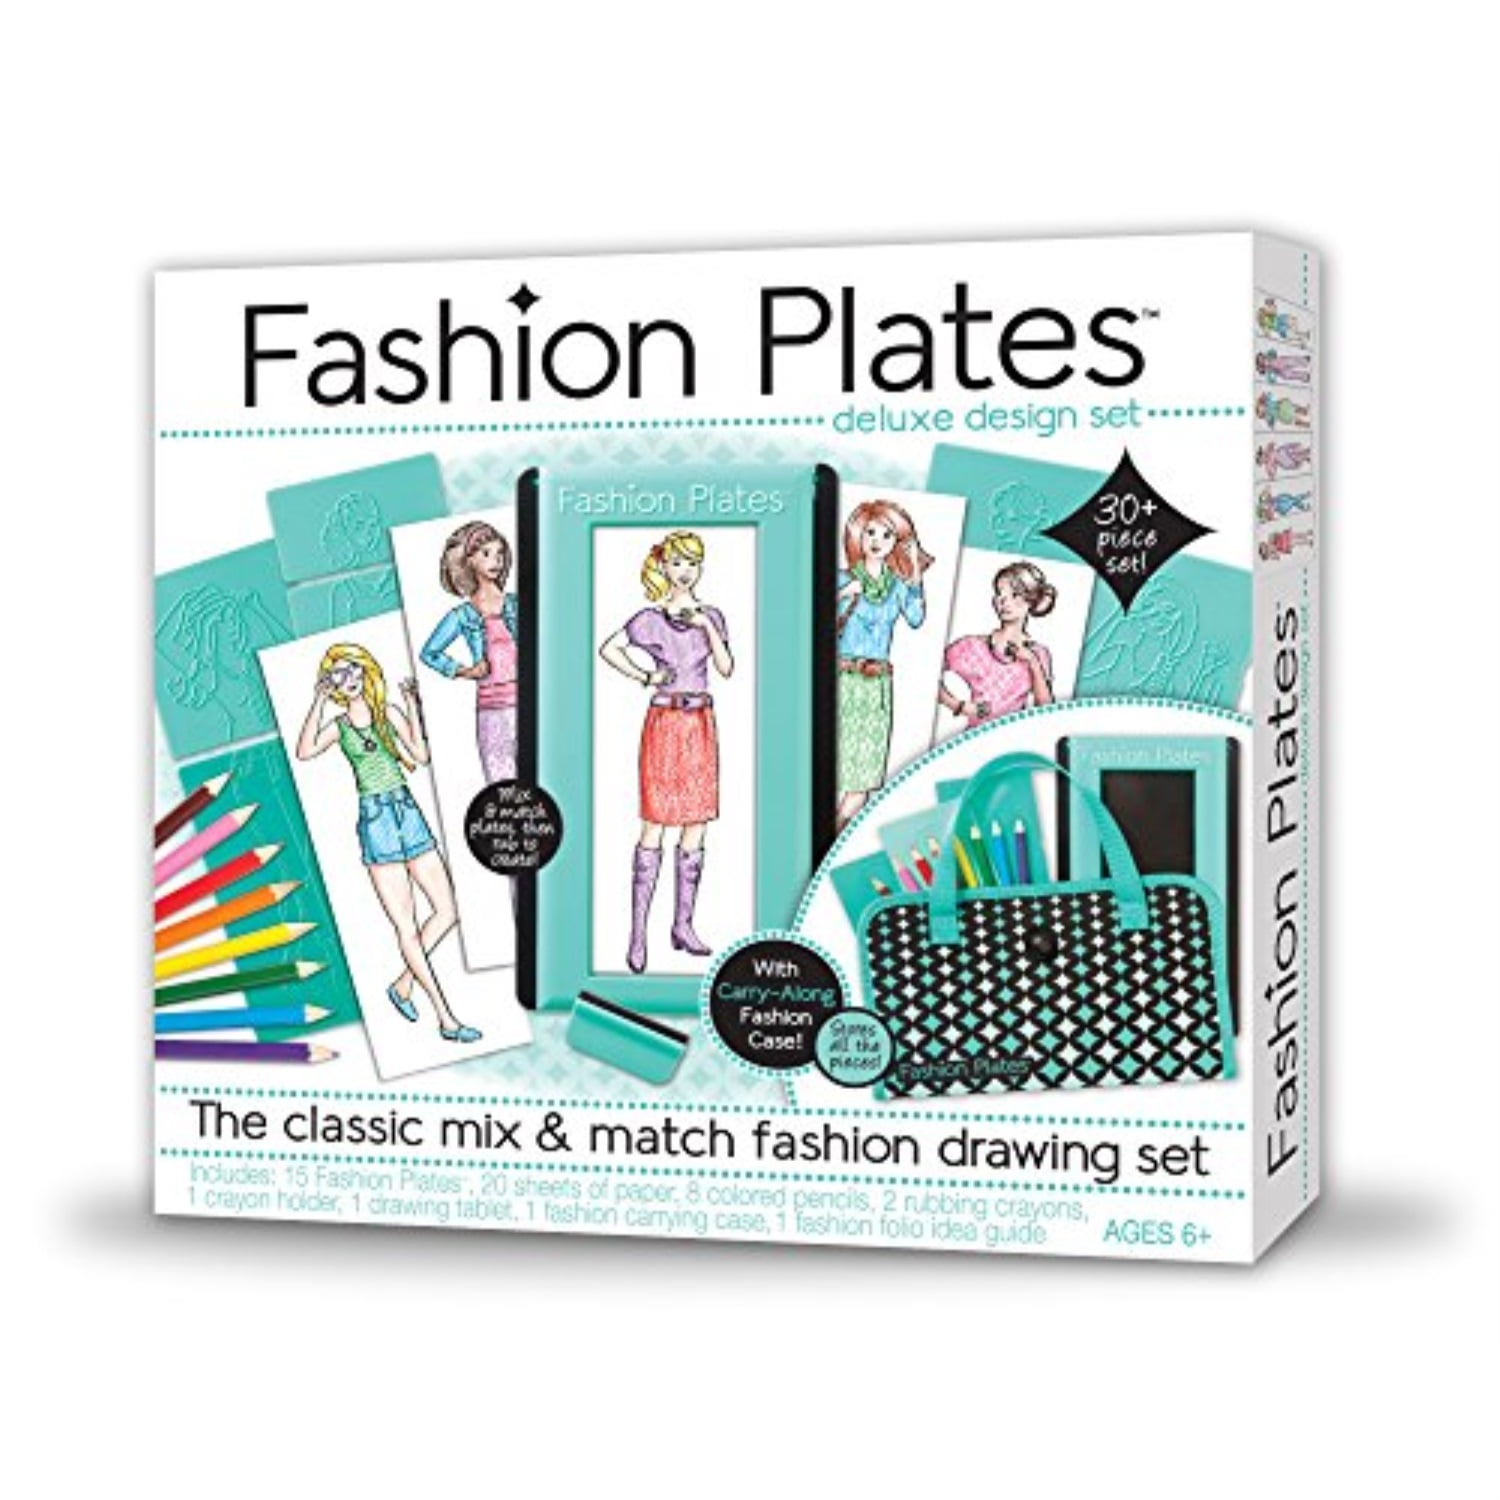 Set of 2 Fashion Plates Travel Kit by Kahootz for sale online 